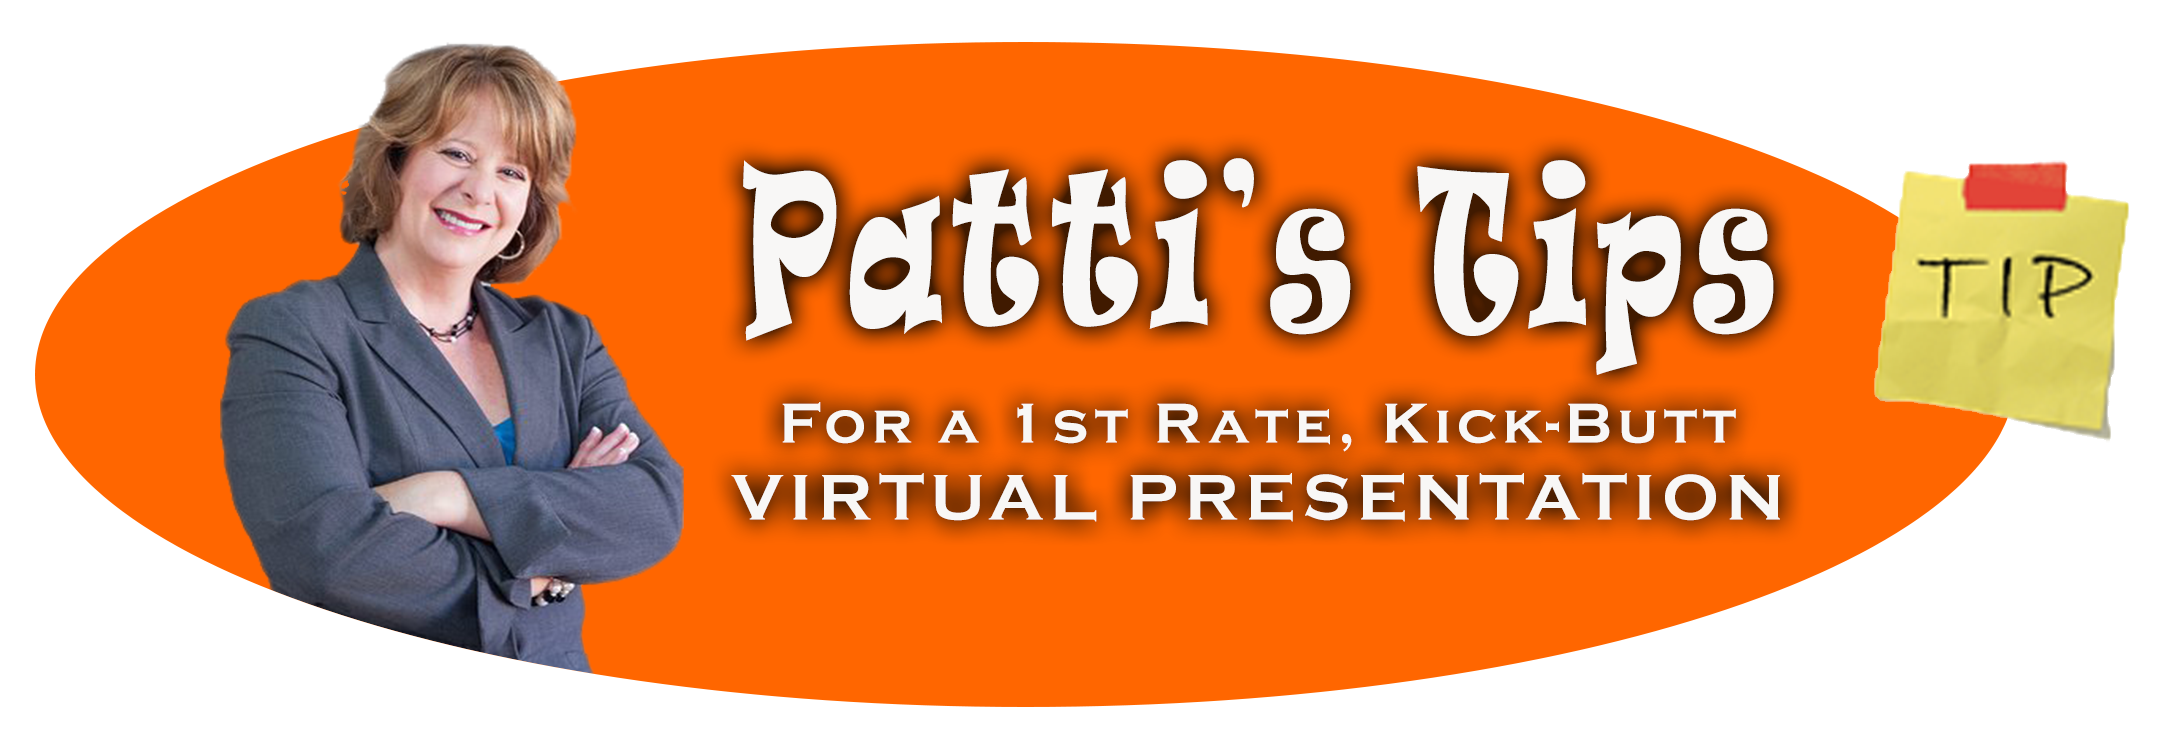 Patti's Tips for 1st Rate, Kick-Butt Virtual Presentations.